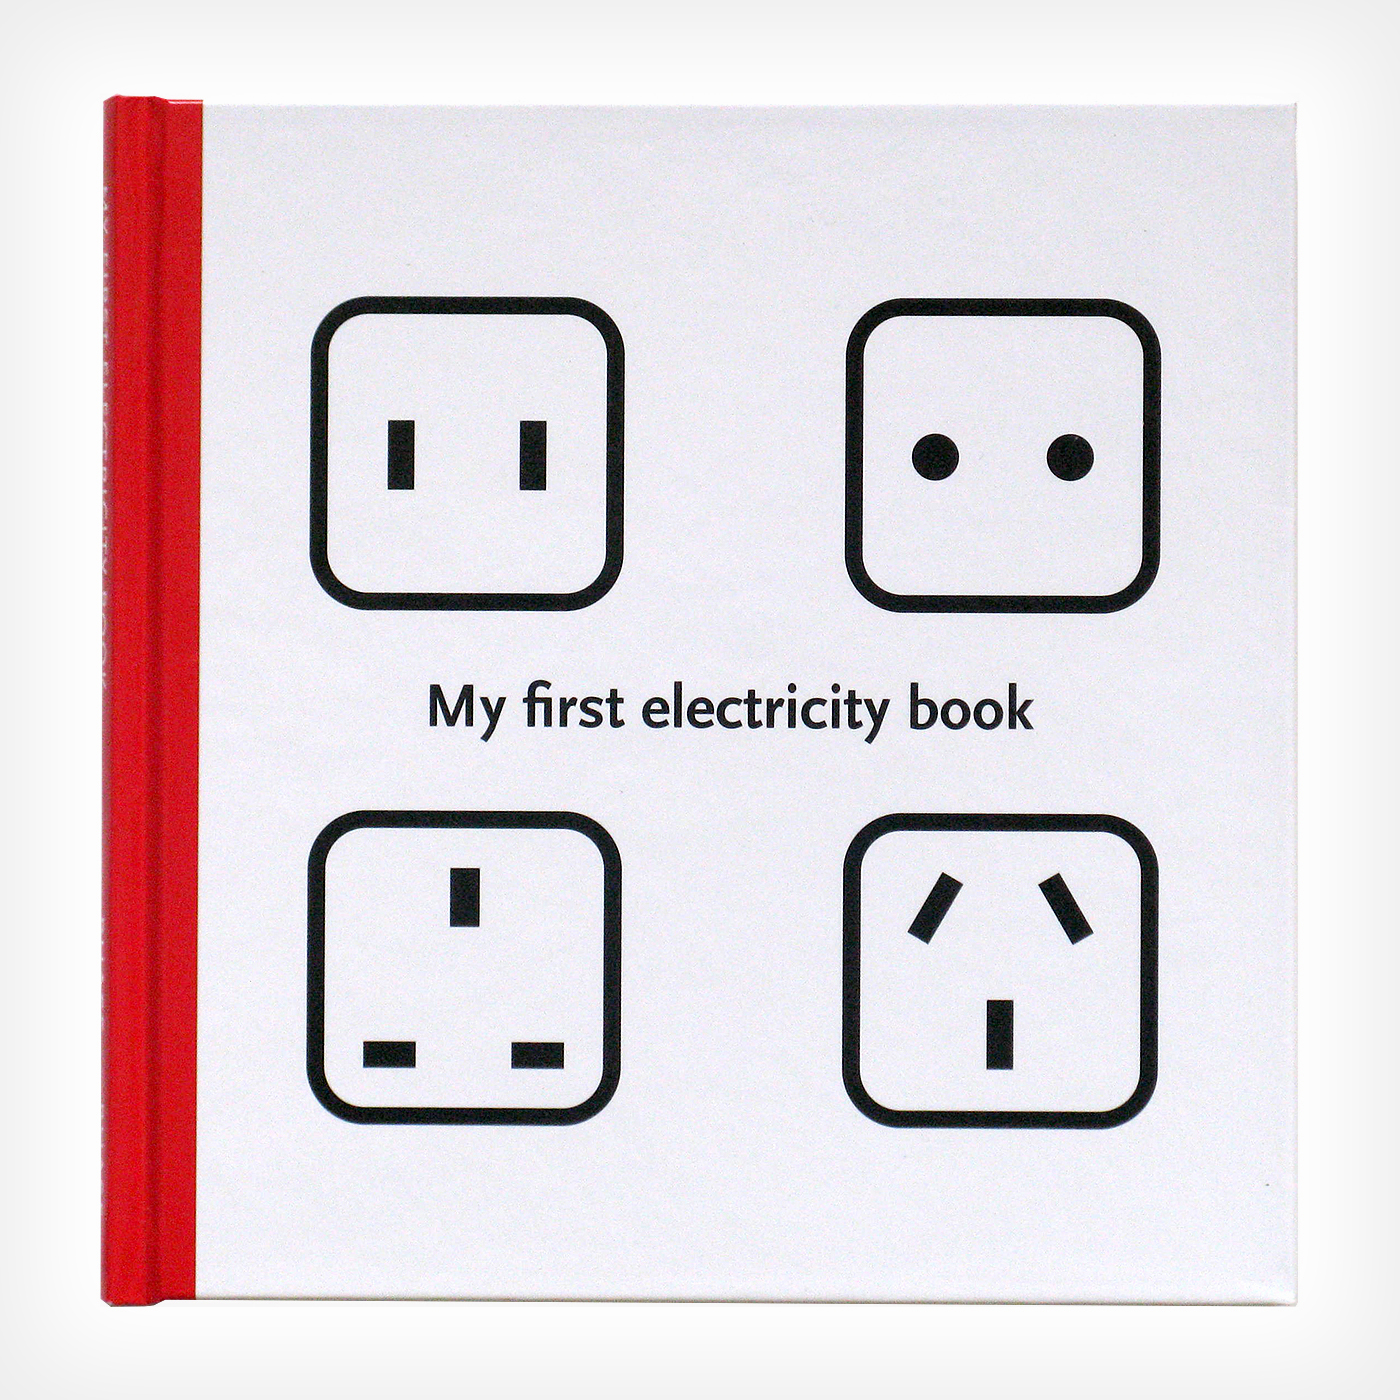 My first electricity book